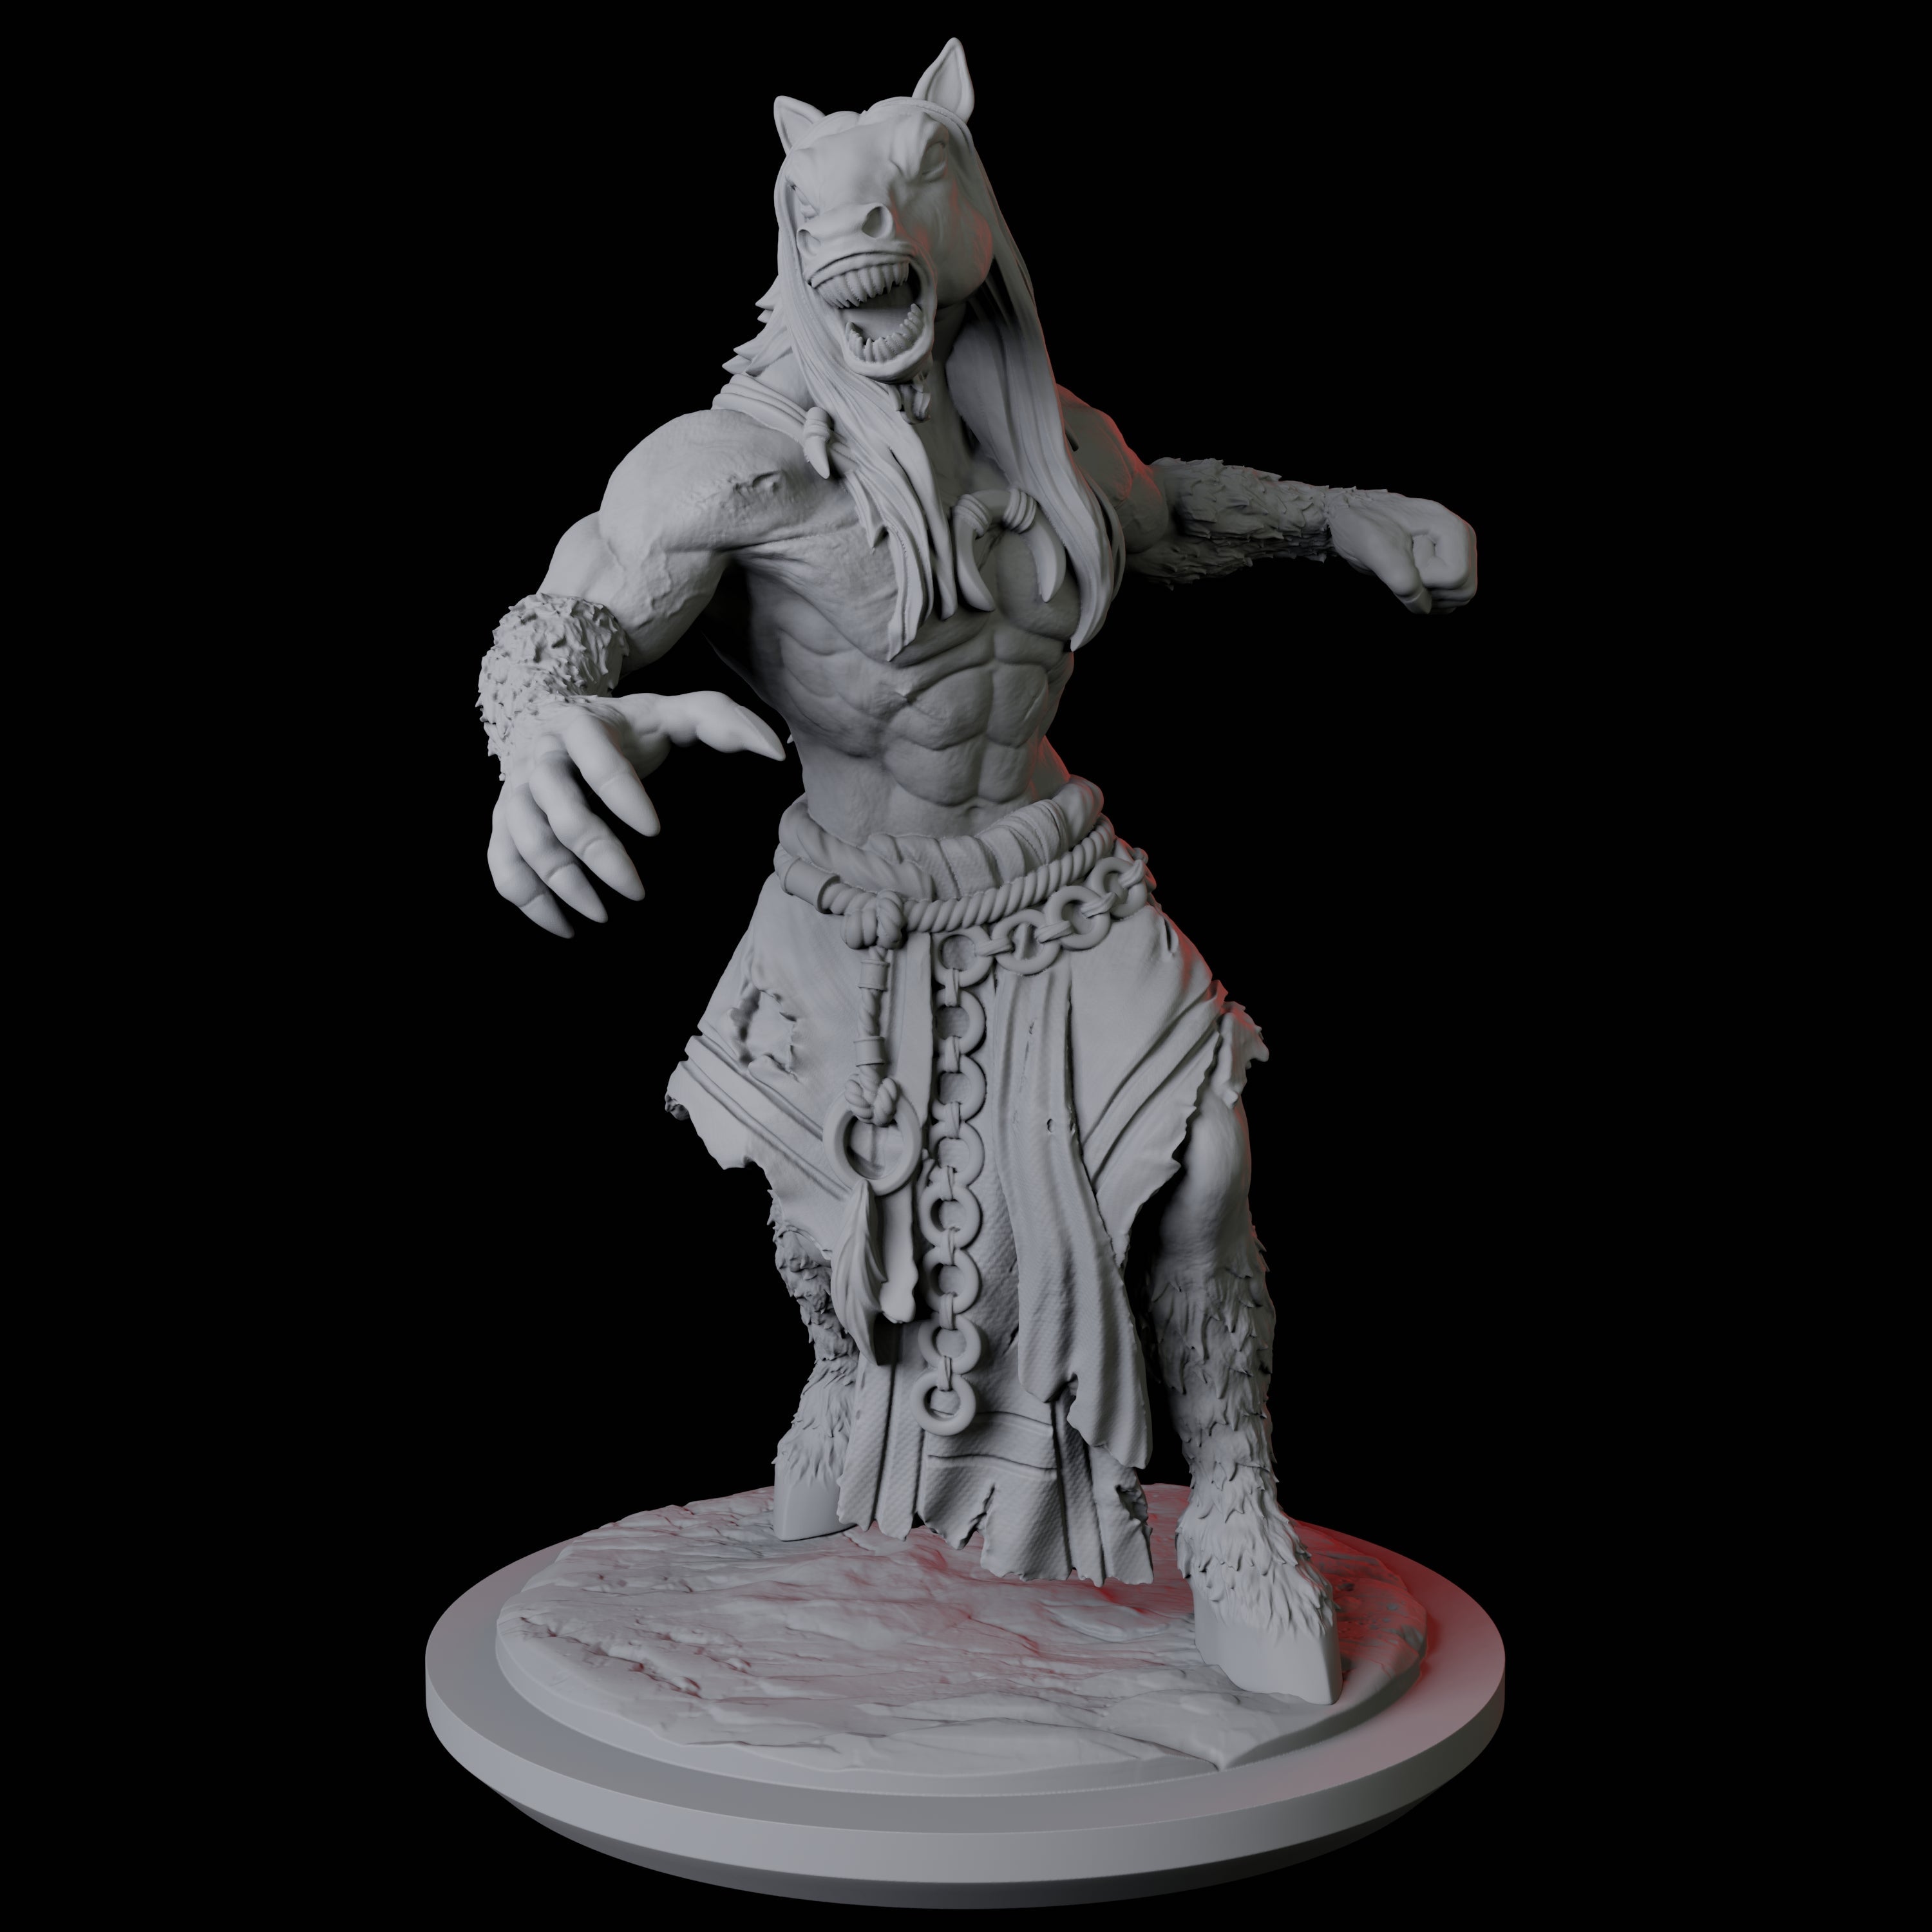 Three Neighing Reverse Centaurs Miniature for Dungeons and Dragons, Pathfinder or other TTRPGs